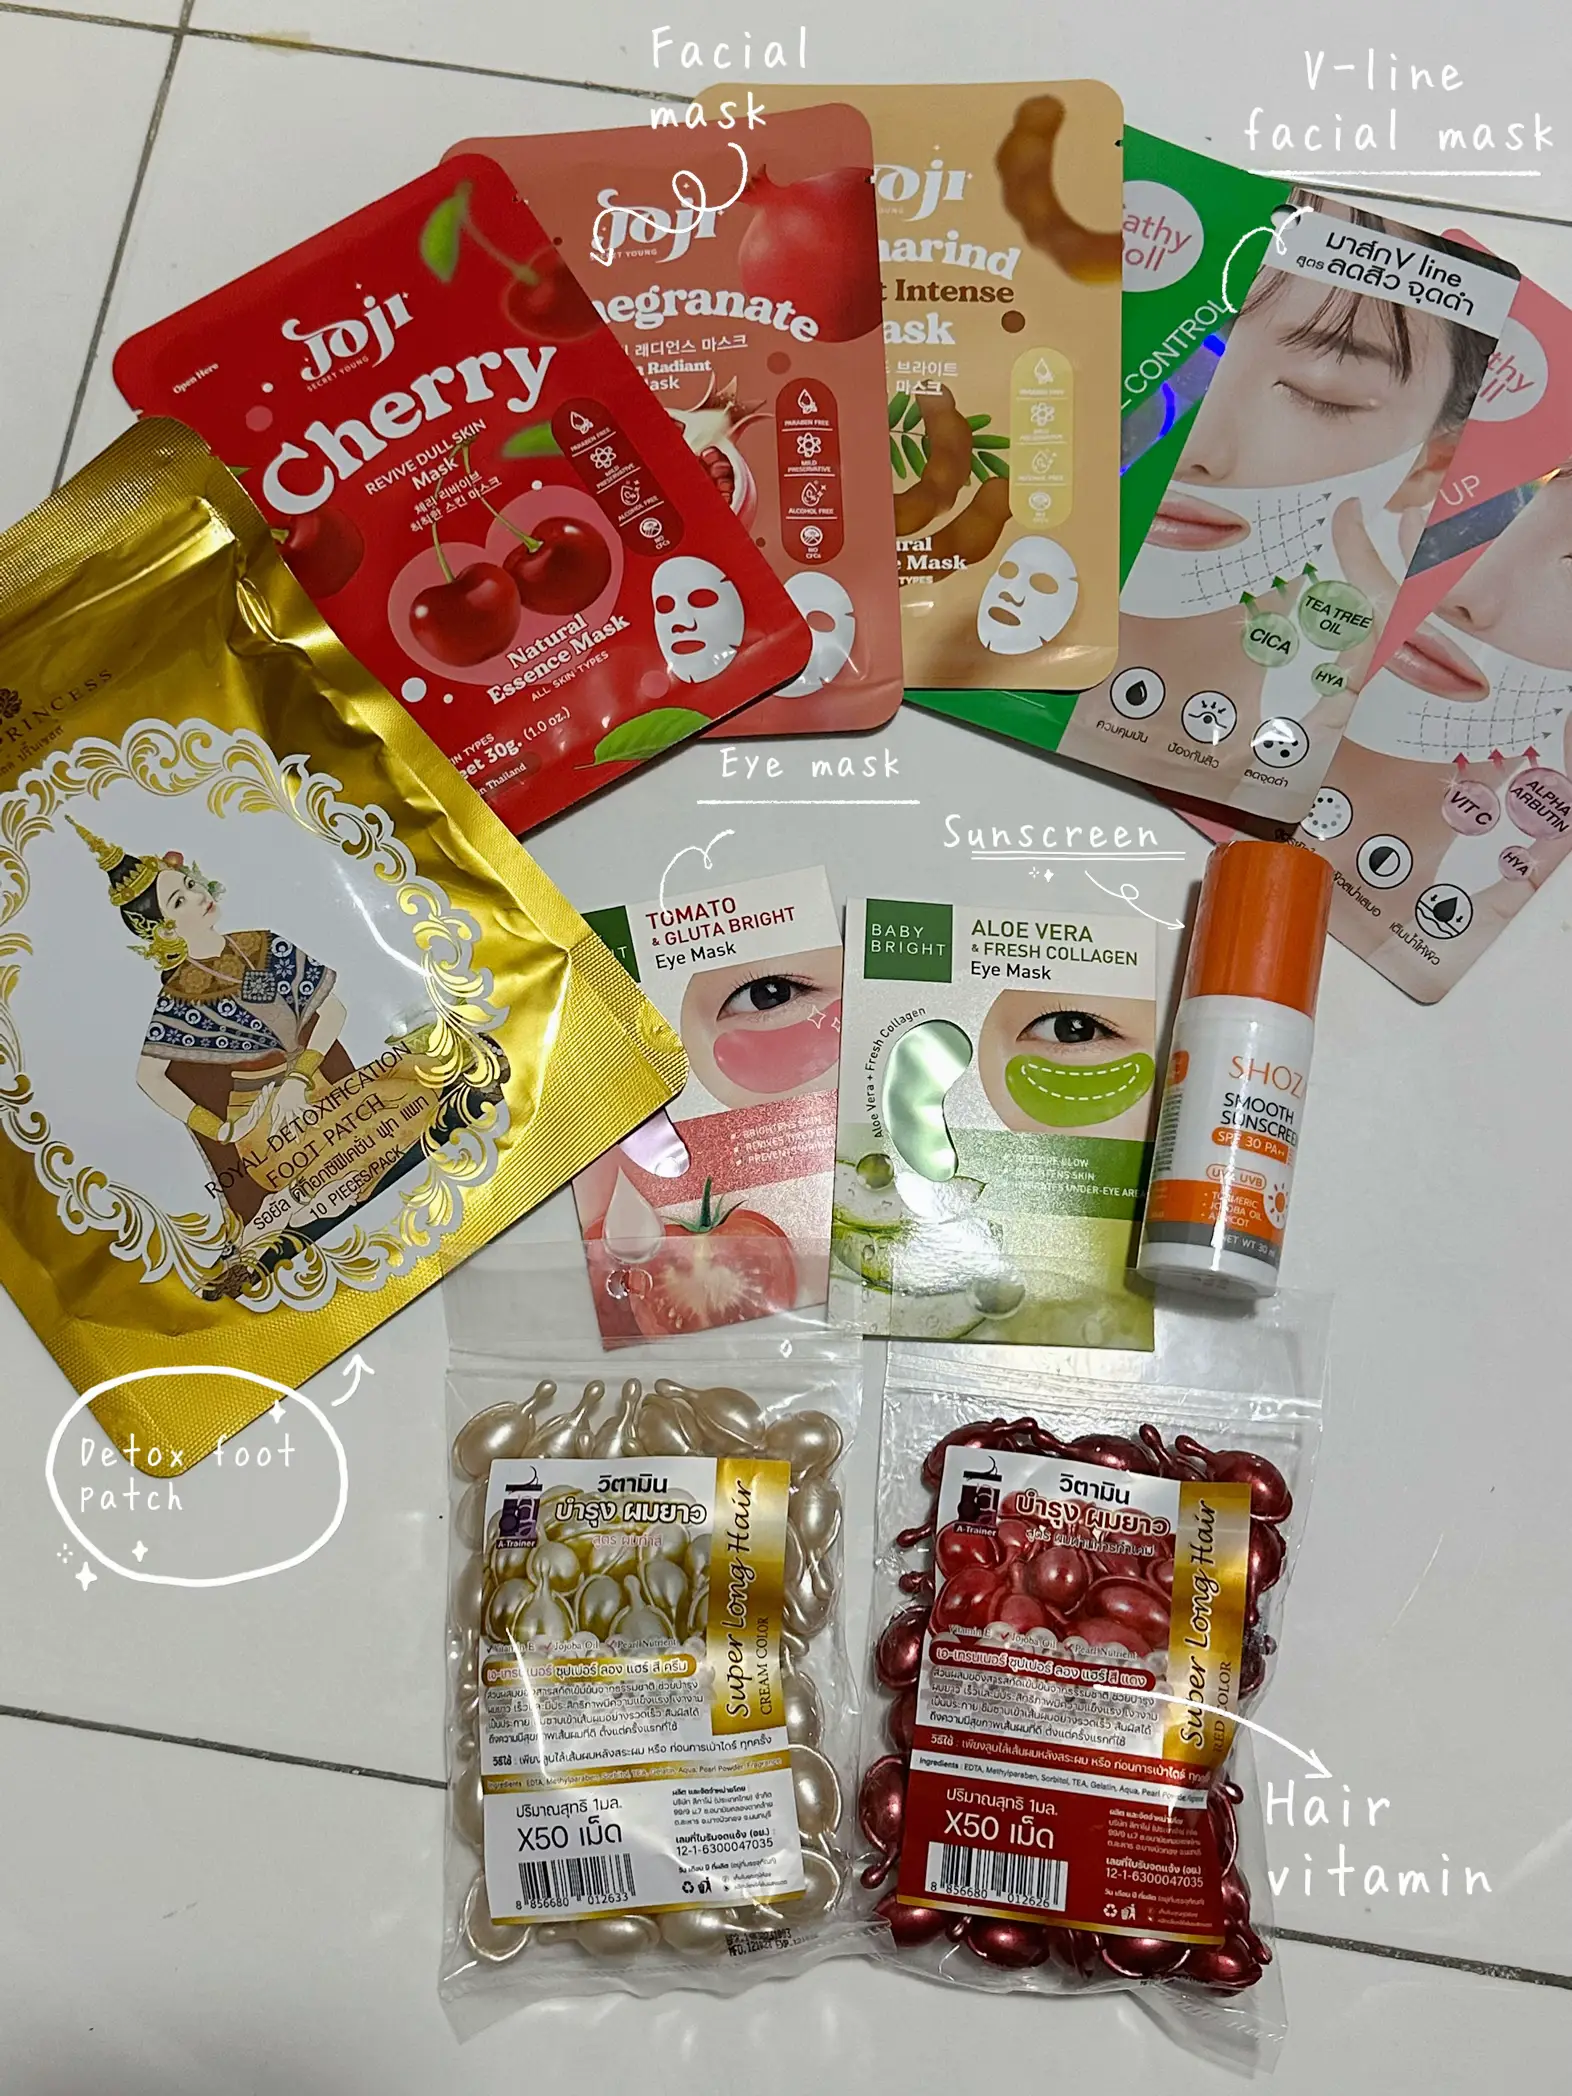 Things to buy @ Tofu Skincare 's images(2)